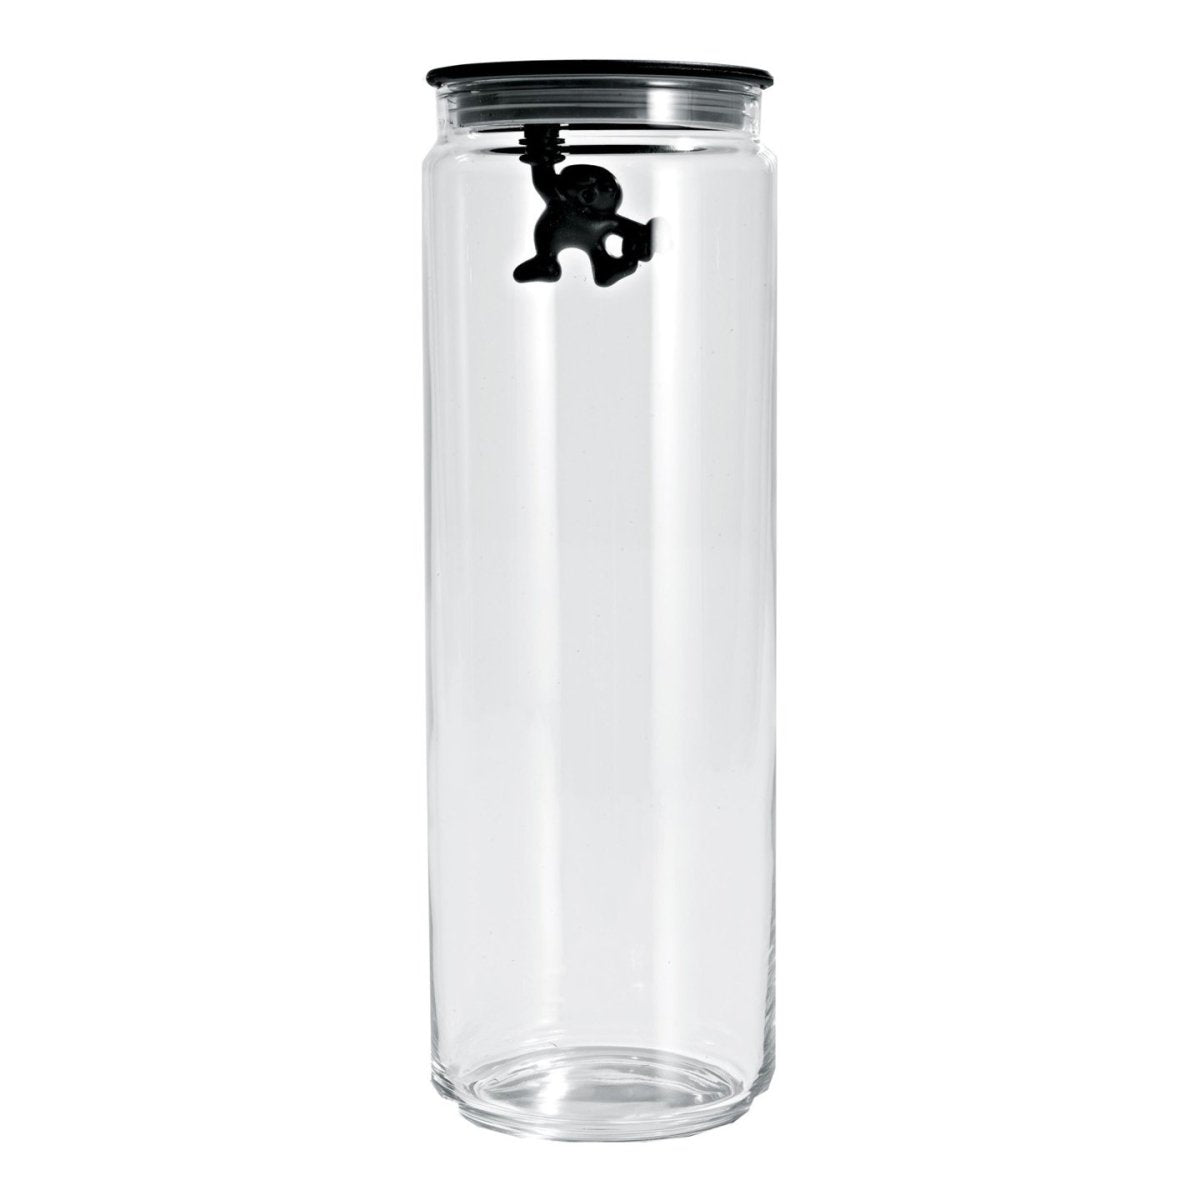 Gianni Large Black Glass Canister - Minimax